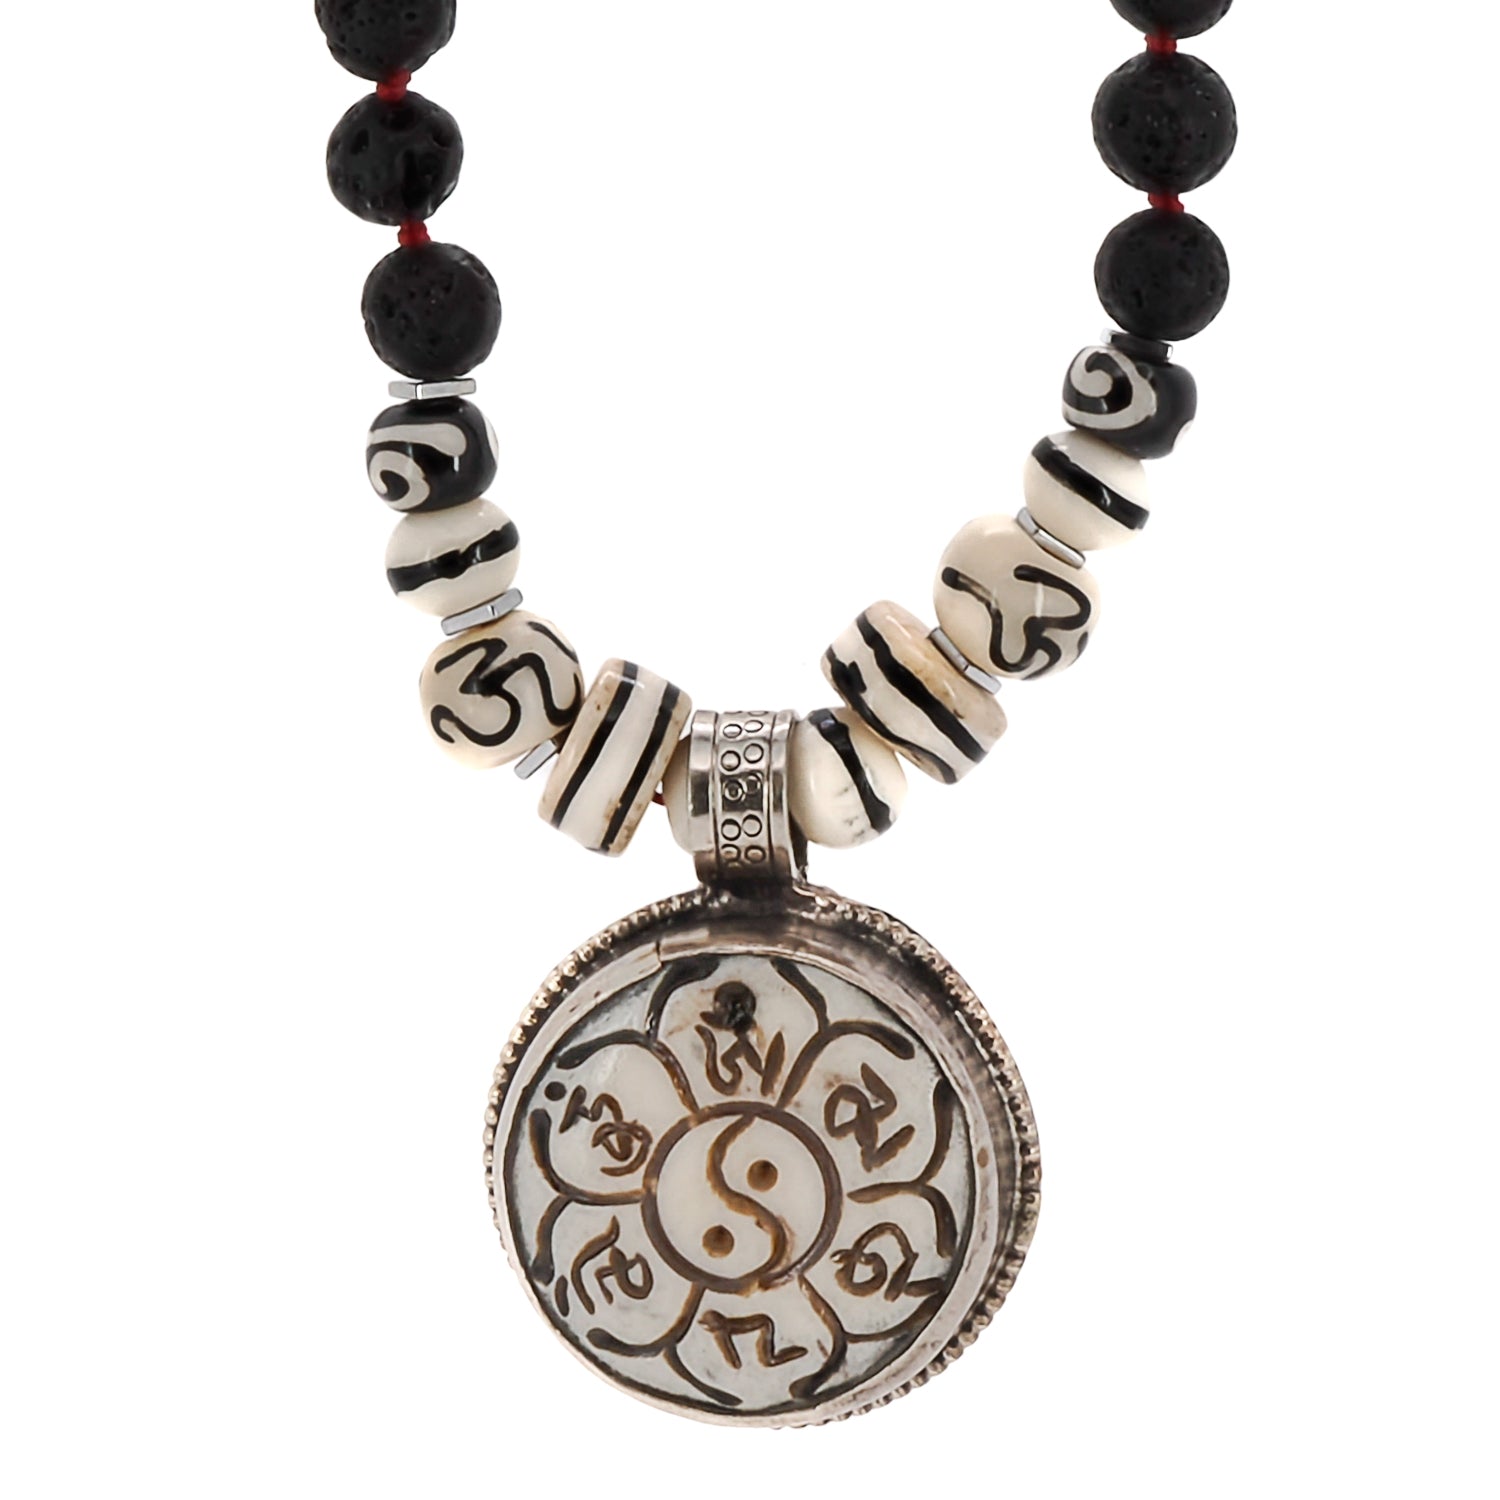 Necklace featuring black lava rock beads and a captivating Yin Yang pendant, symbolizing the interplay of opposing forces.